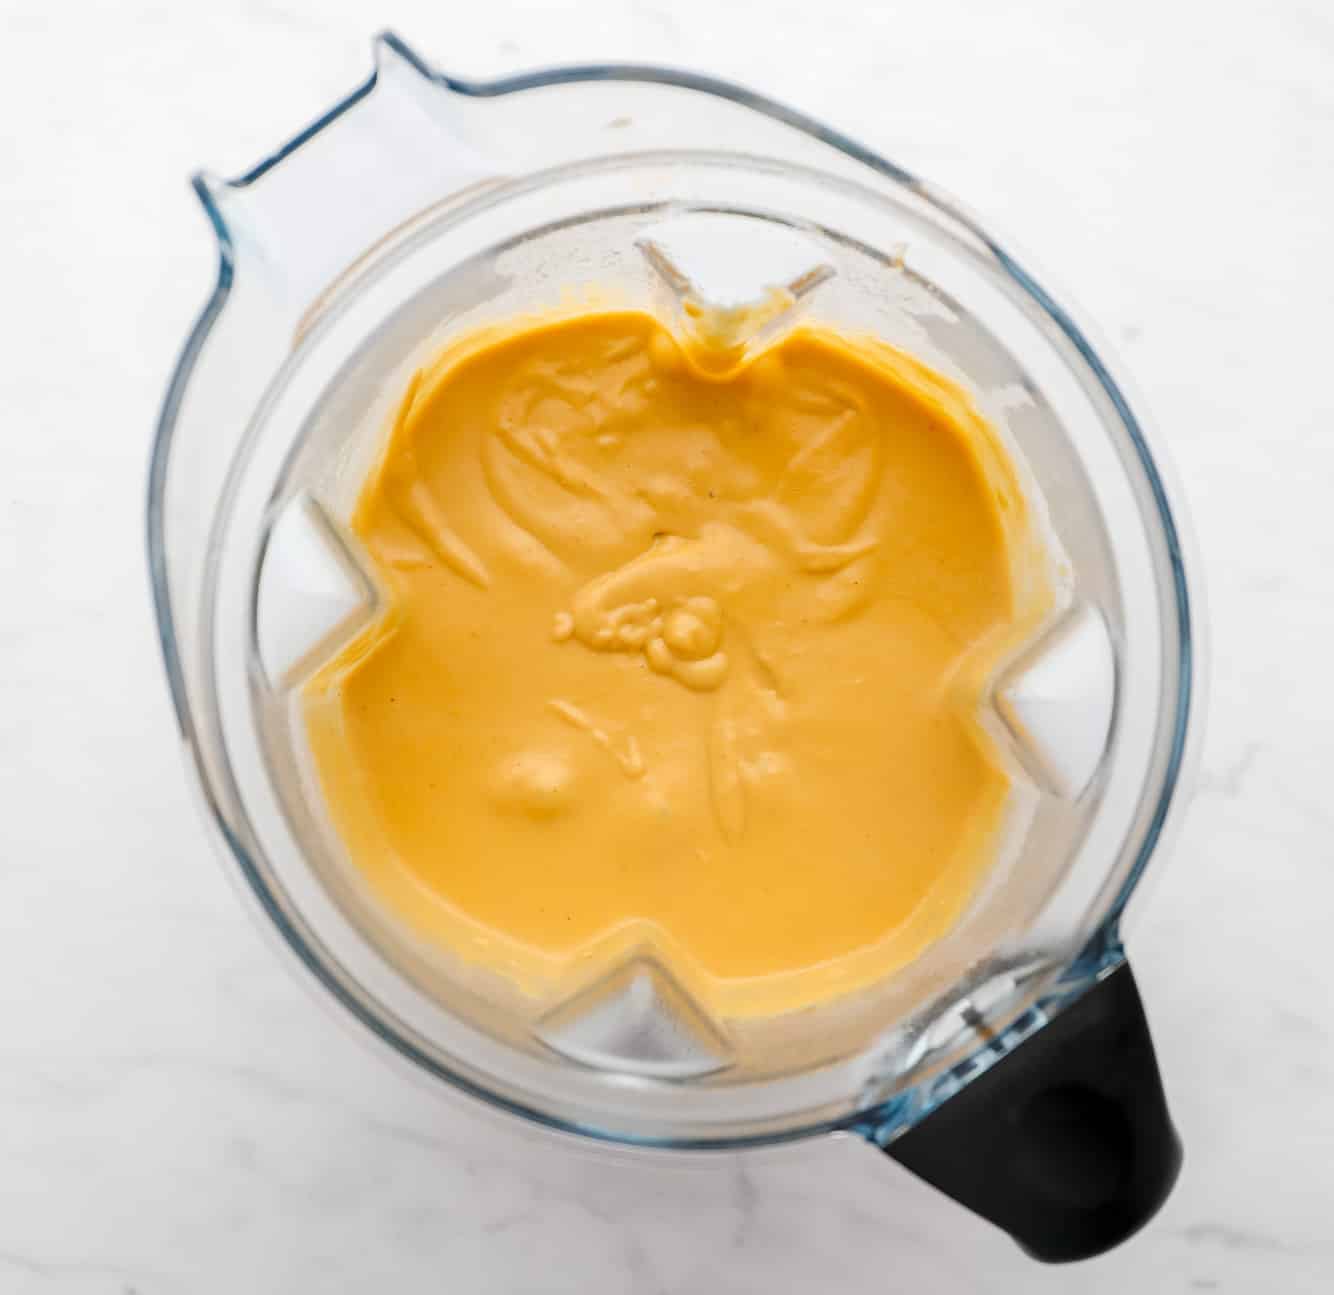 A creamy, yellow, blended mixture in a large blender.